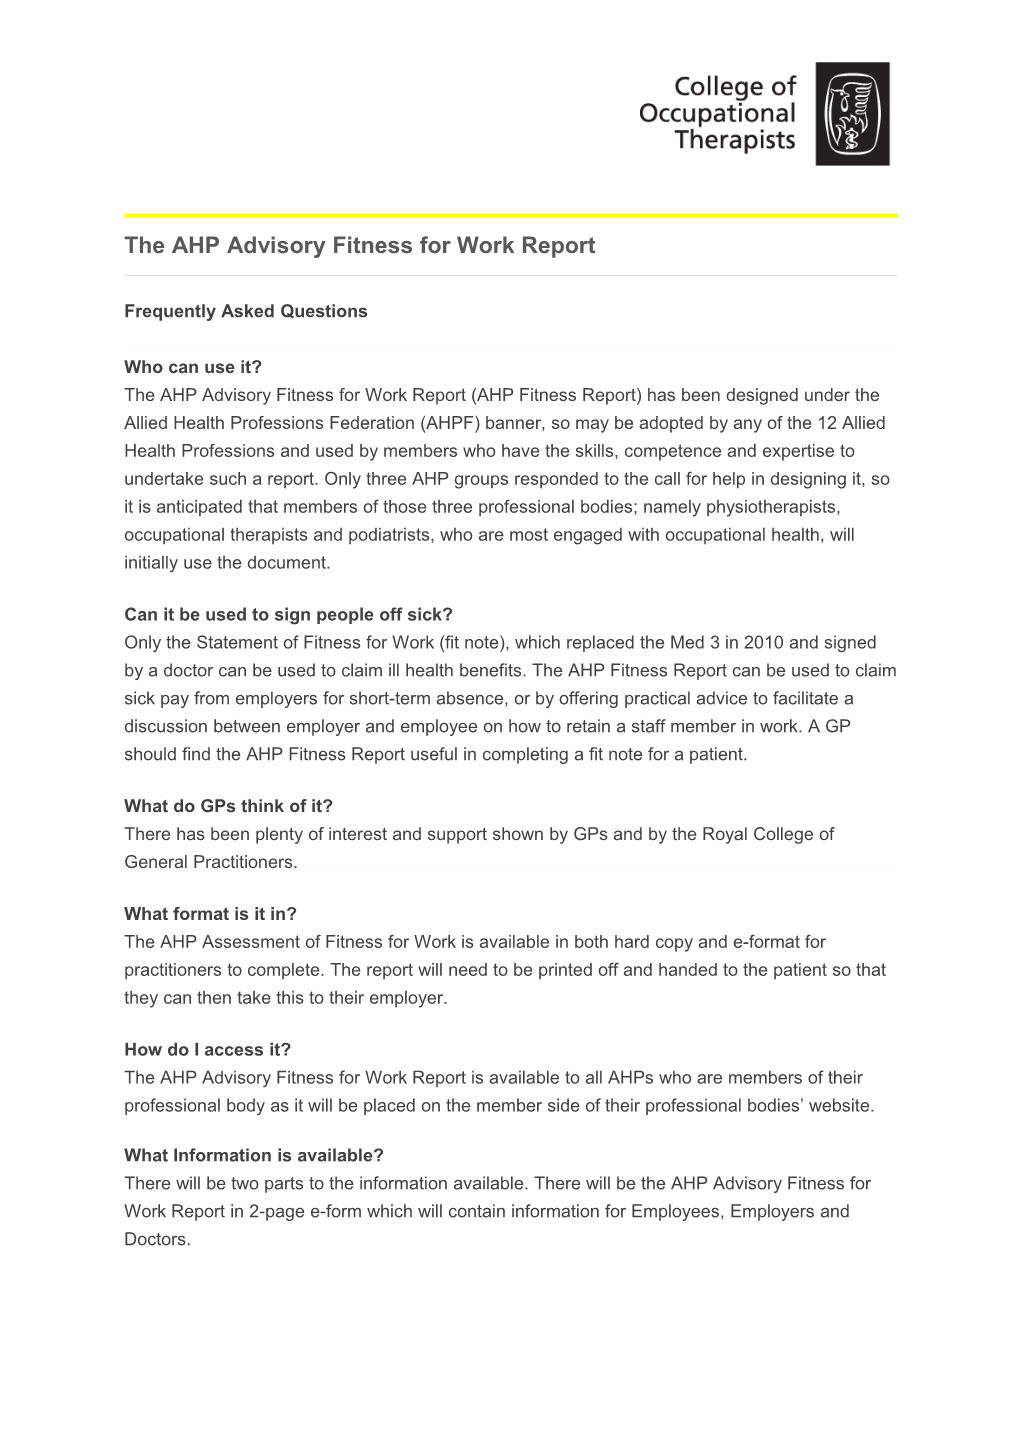 The AHP Advisory Fitness for Work Report